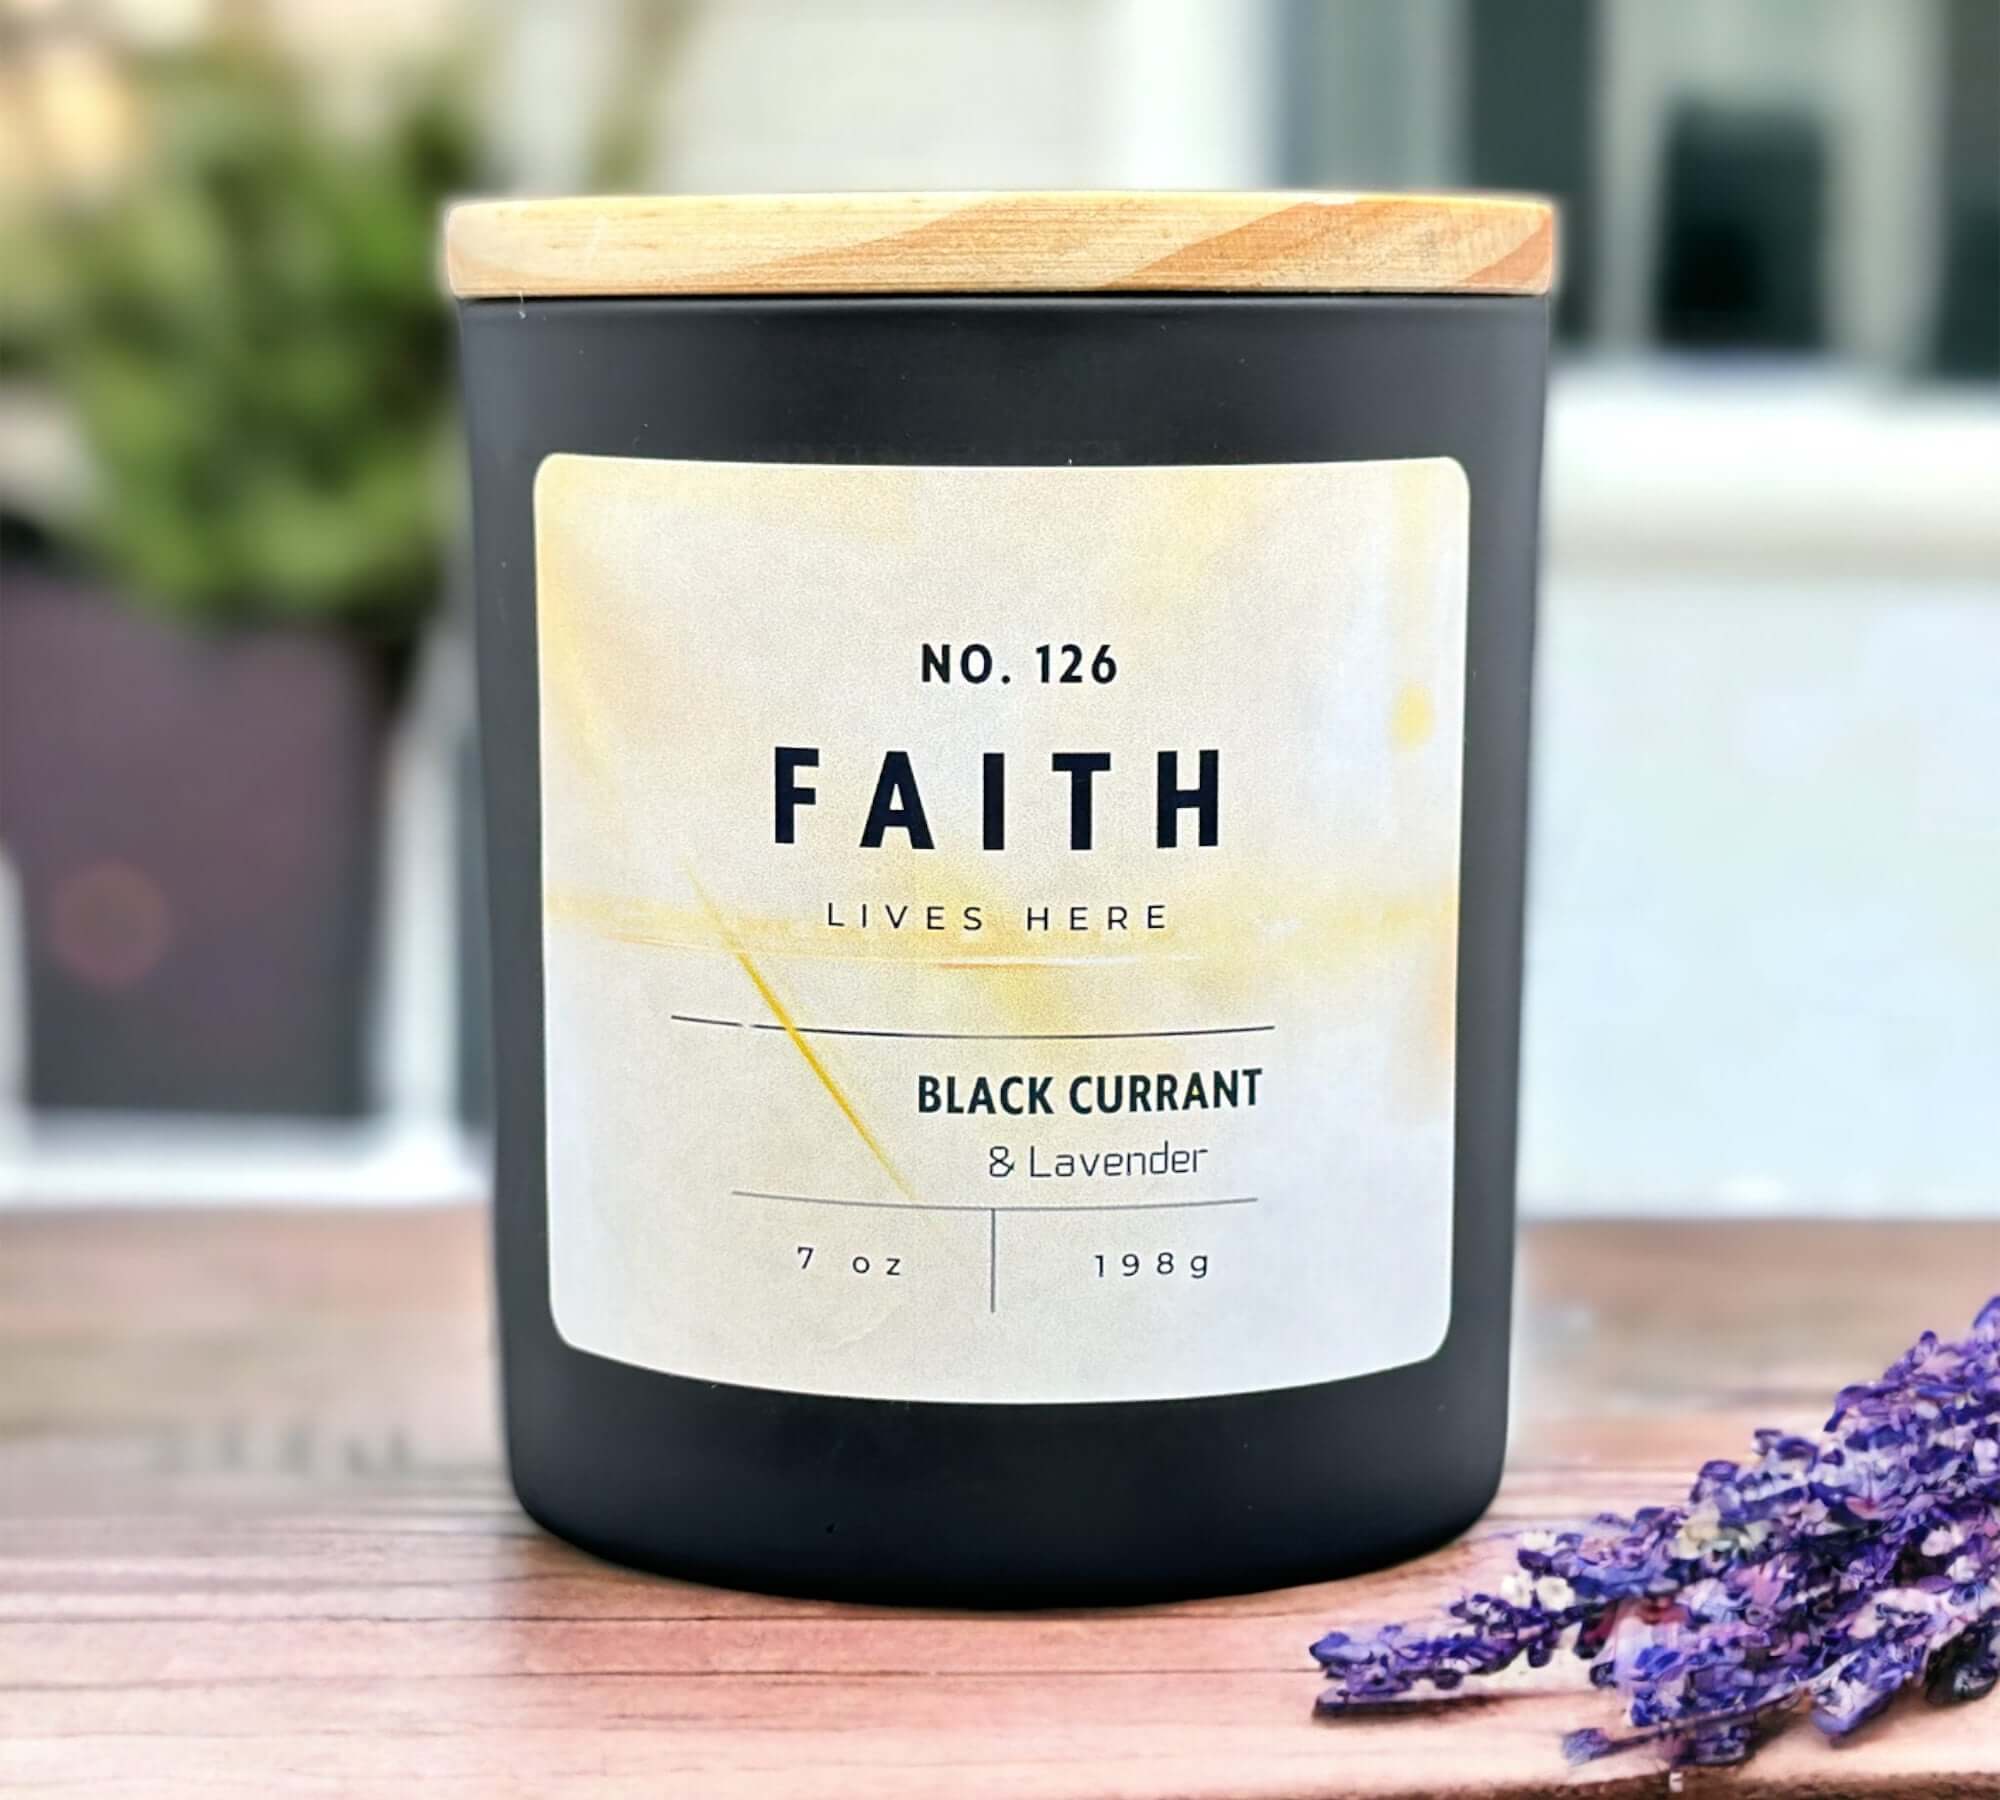 Faith lives here. Black currant and lavender candle